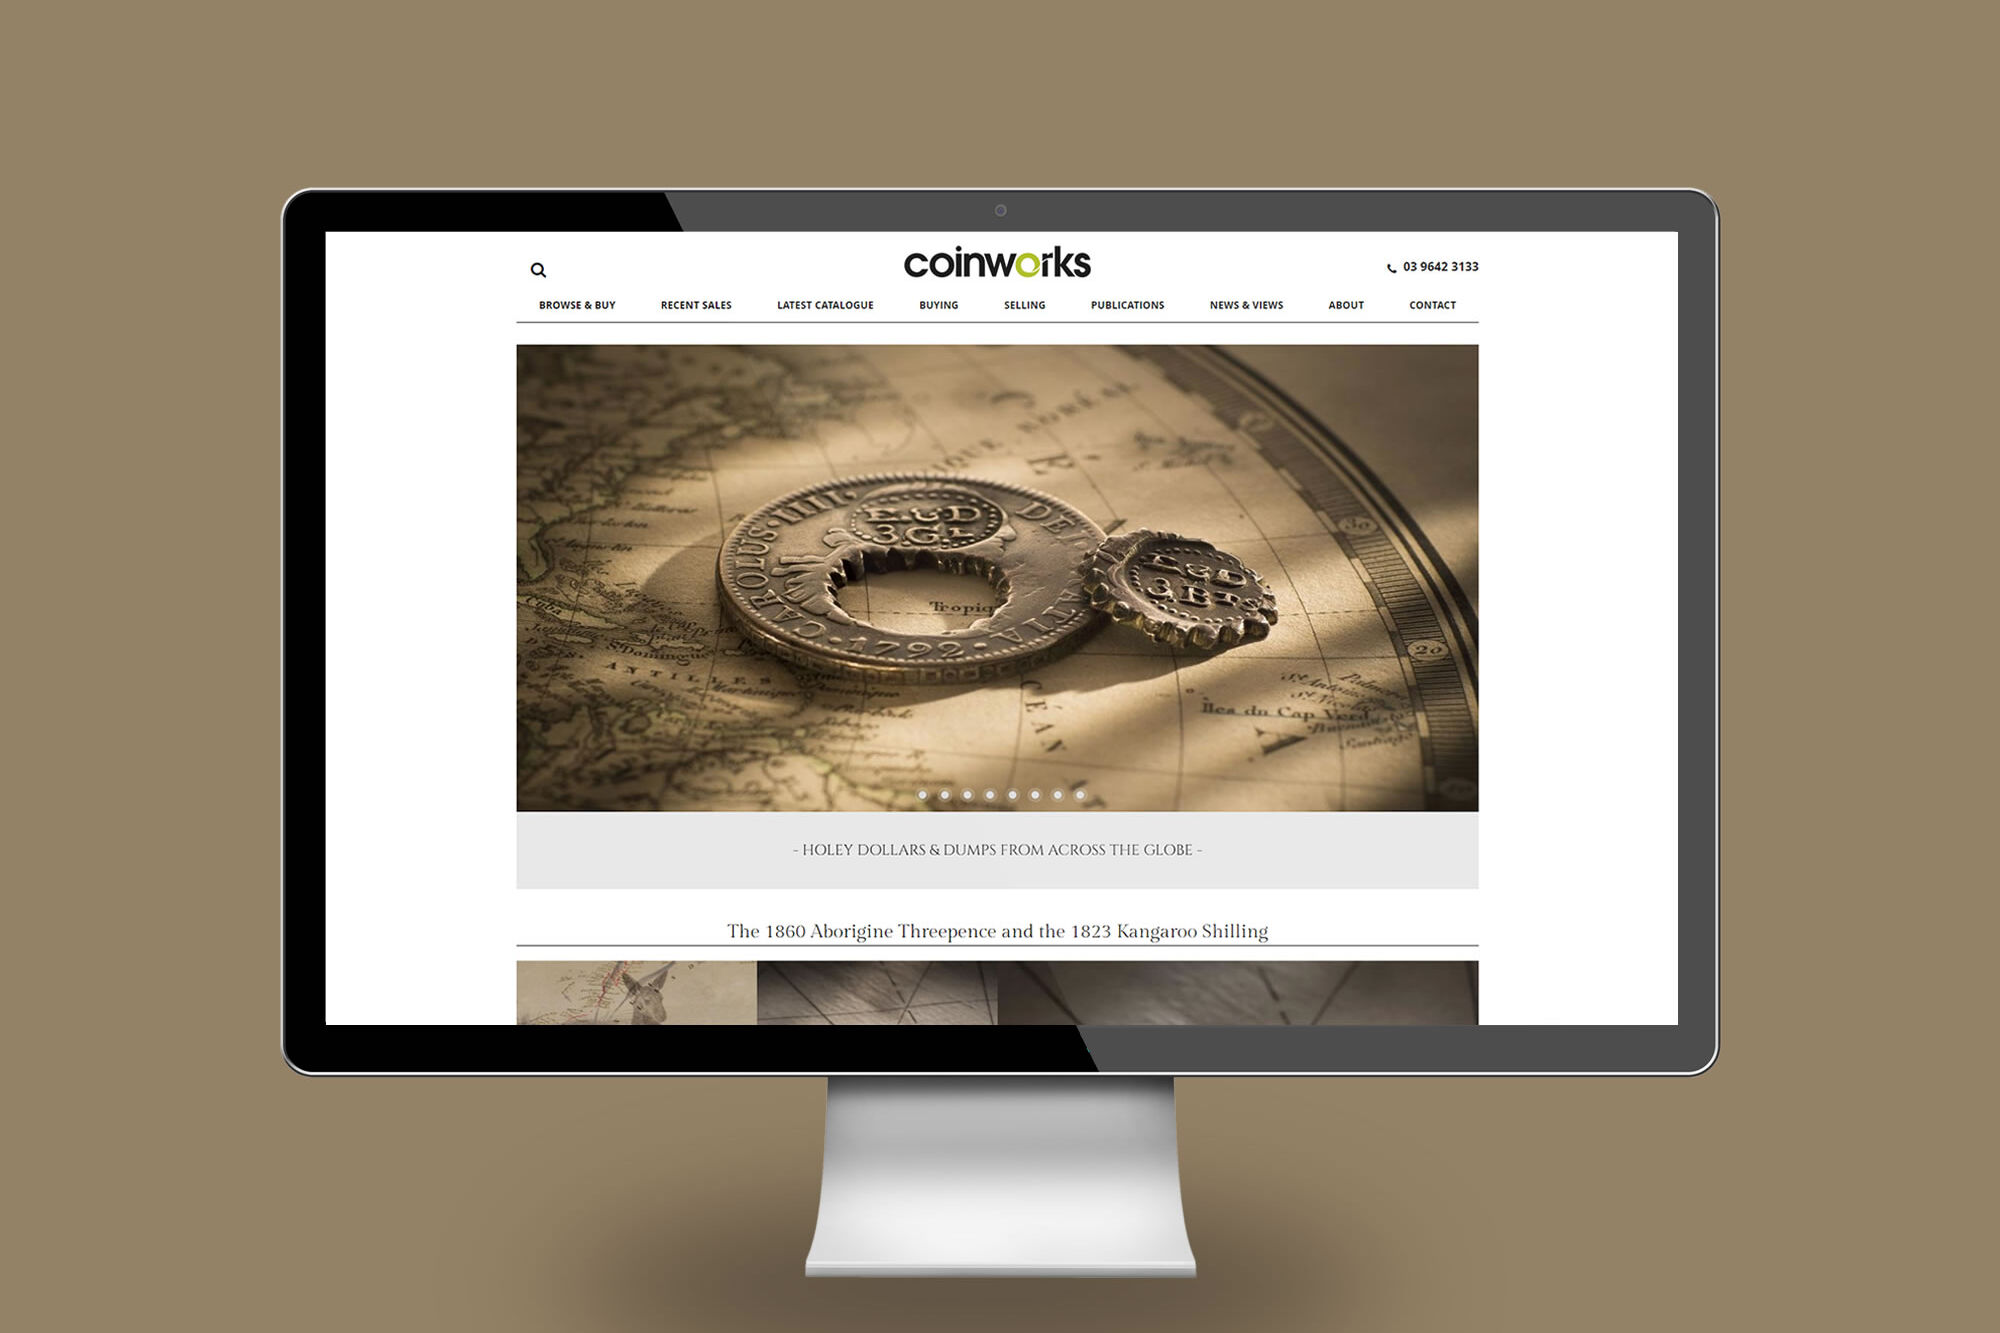 Coinworks Rare coins and banknote dealers